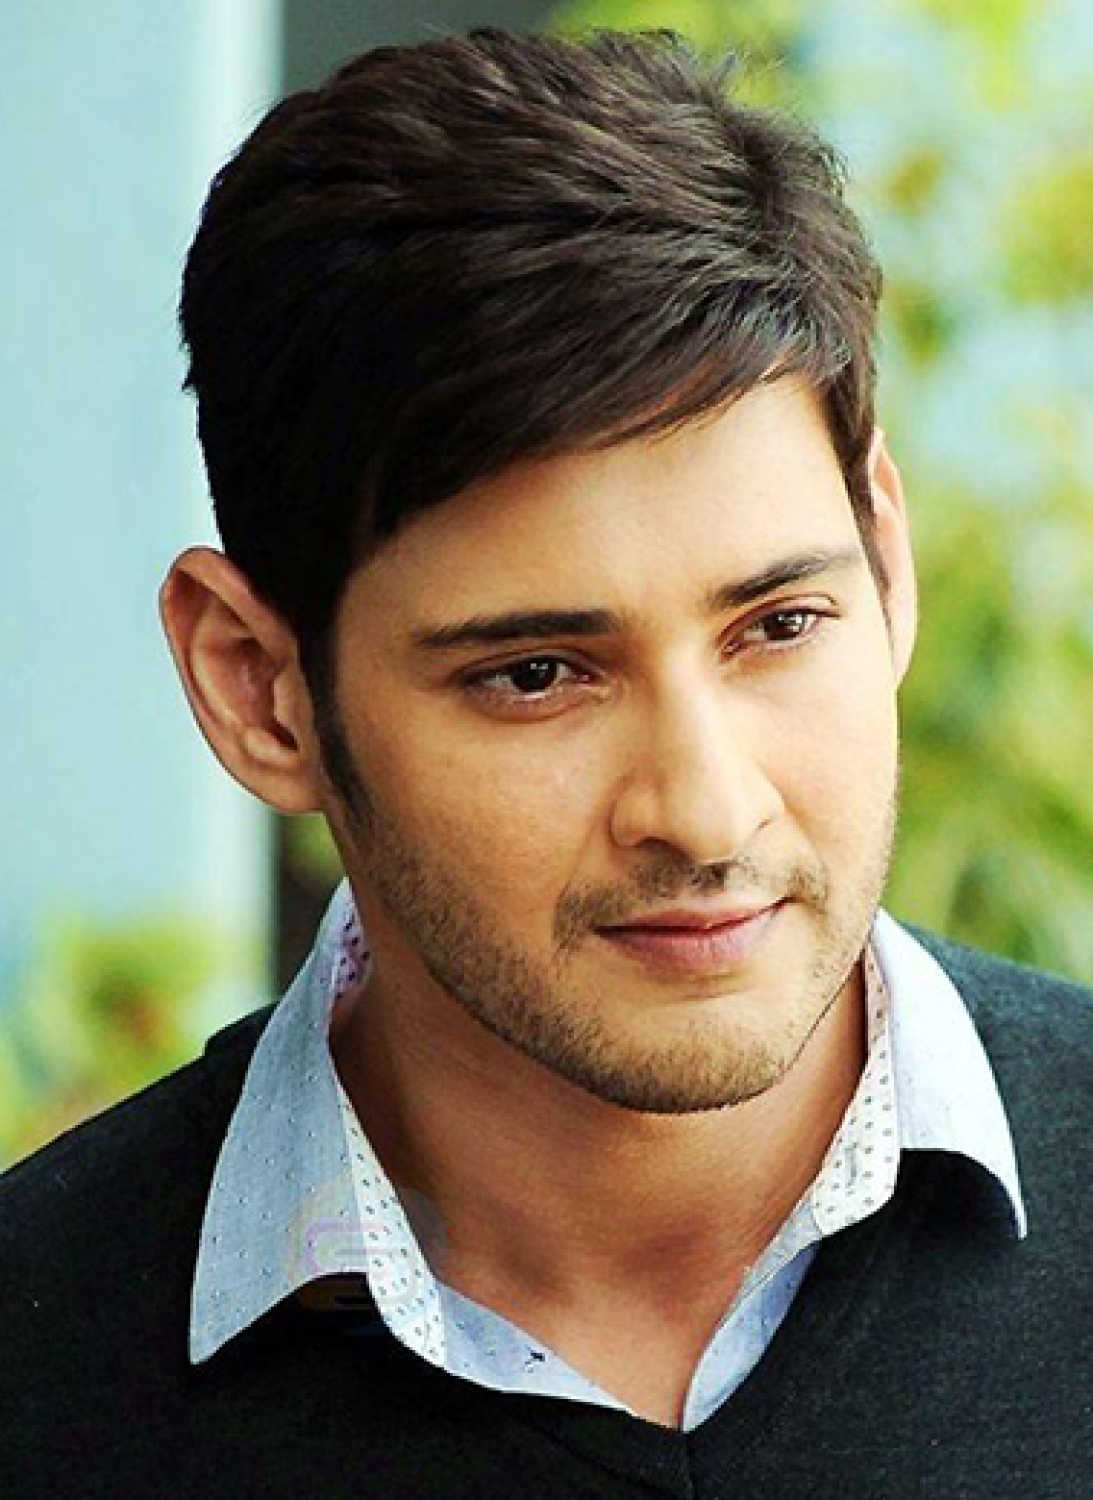 Mahesh Babu might set foot in Bollywood soon: Reports - The Indian Wire